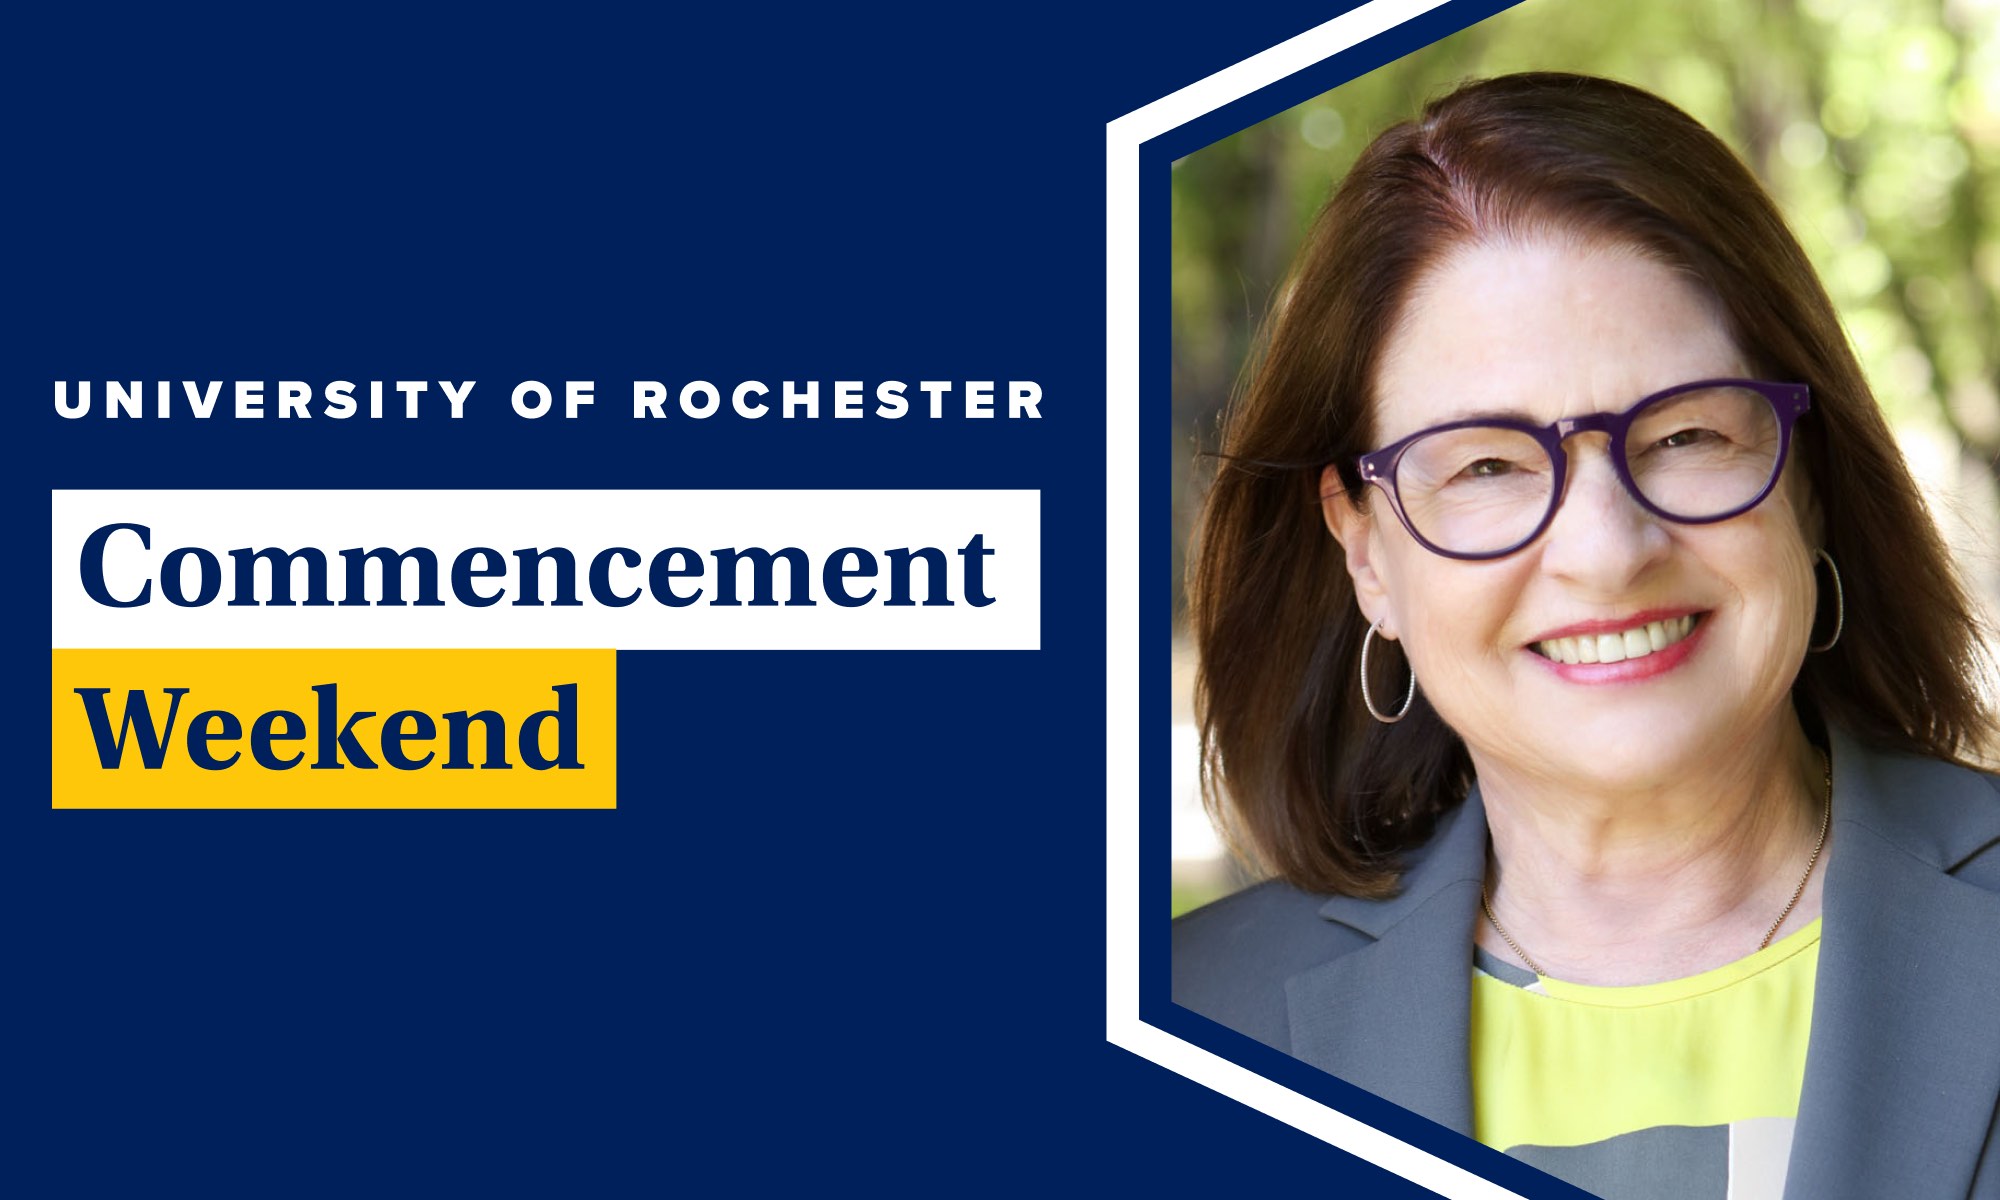 Graphic featuring a photo of Laura Carstensen smiling at the camera alongside text that reads "University of Rochester Commencement Weekend."